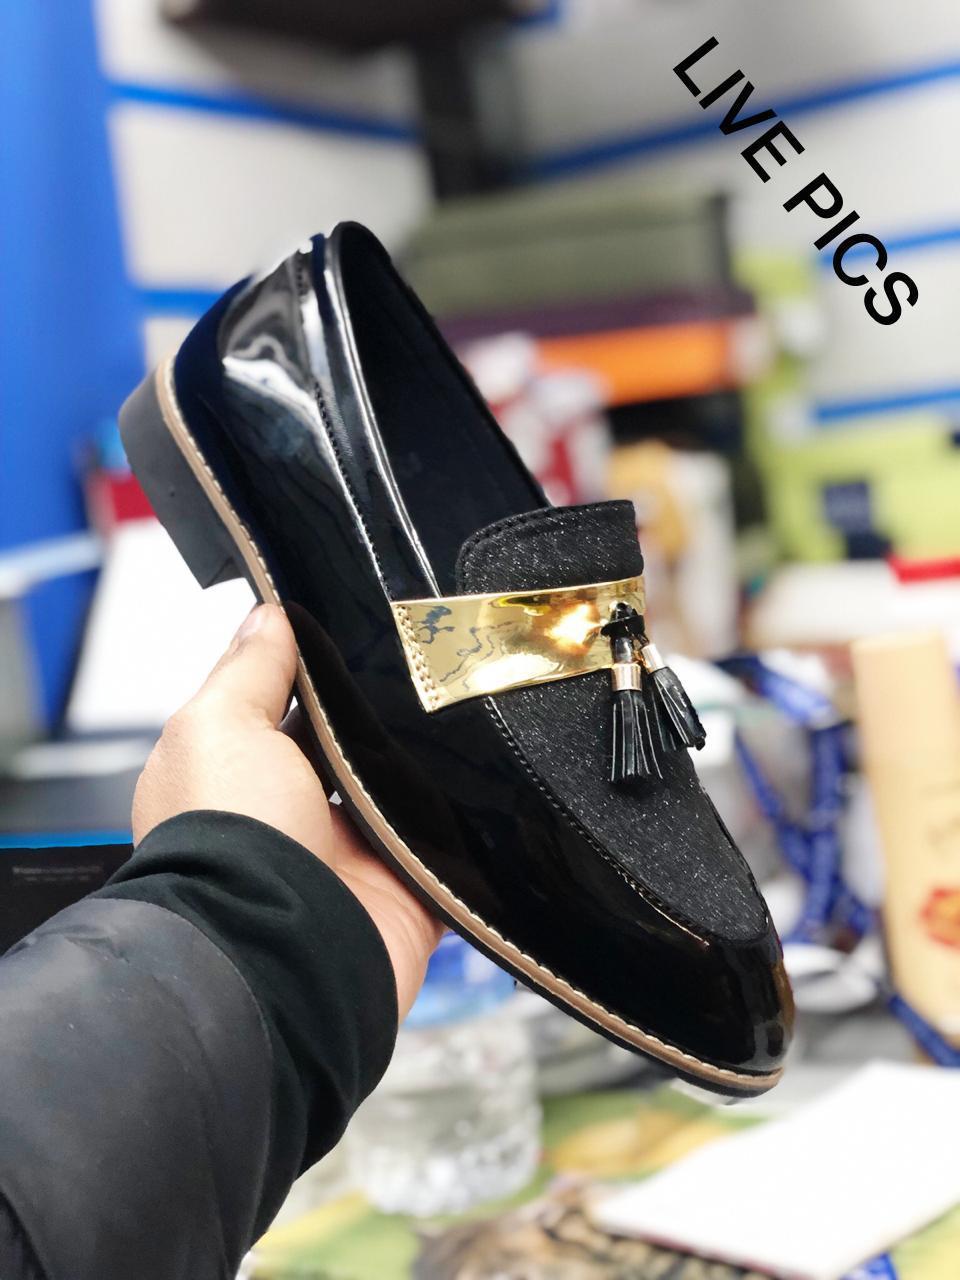 Stylish Wear Men Shiny Black Color Outdoor Formal And Party Casual Ethnic Loafer-Unique and Classy